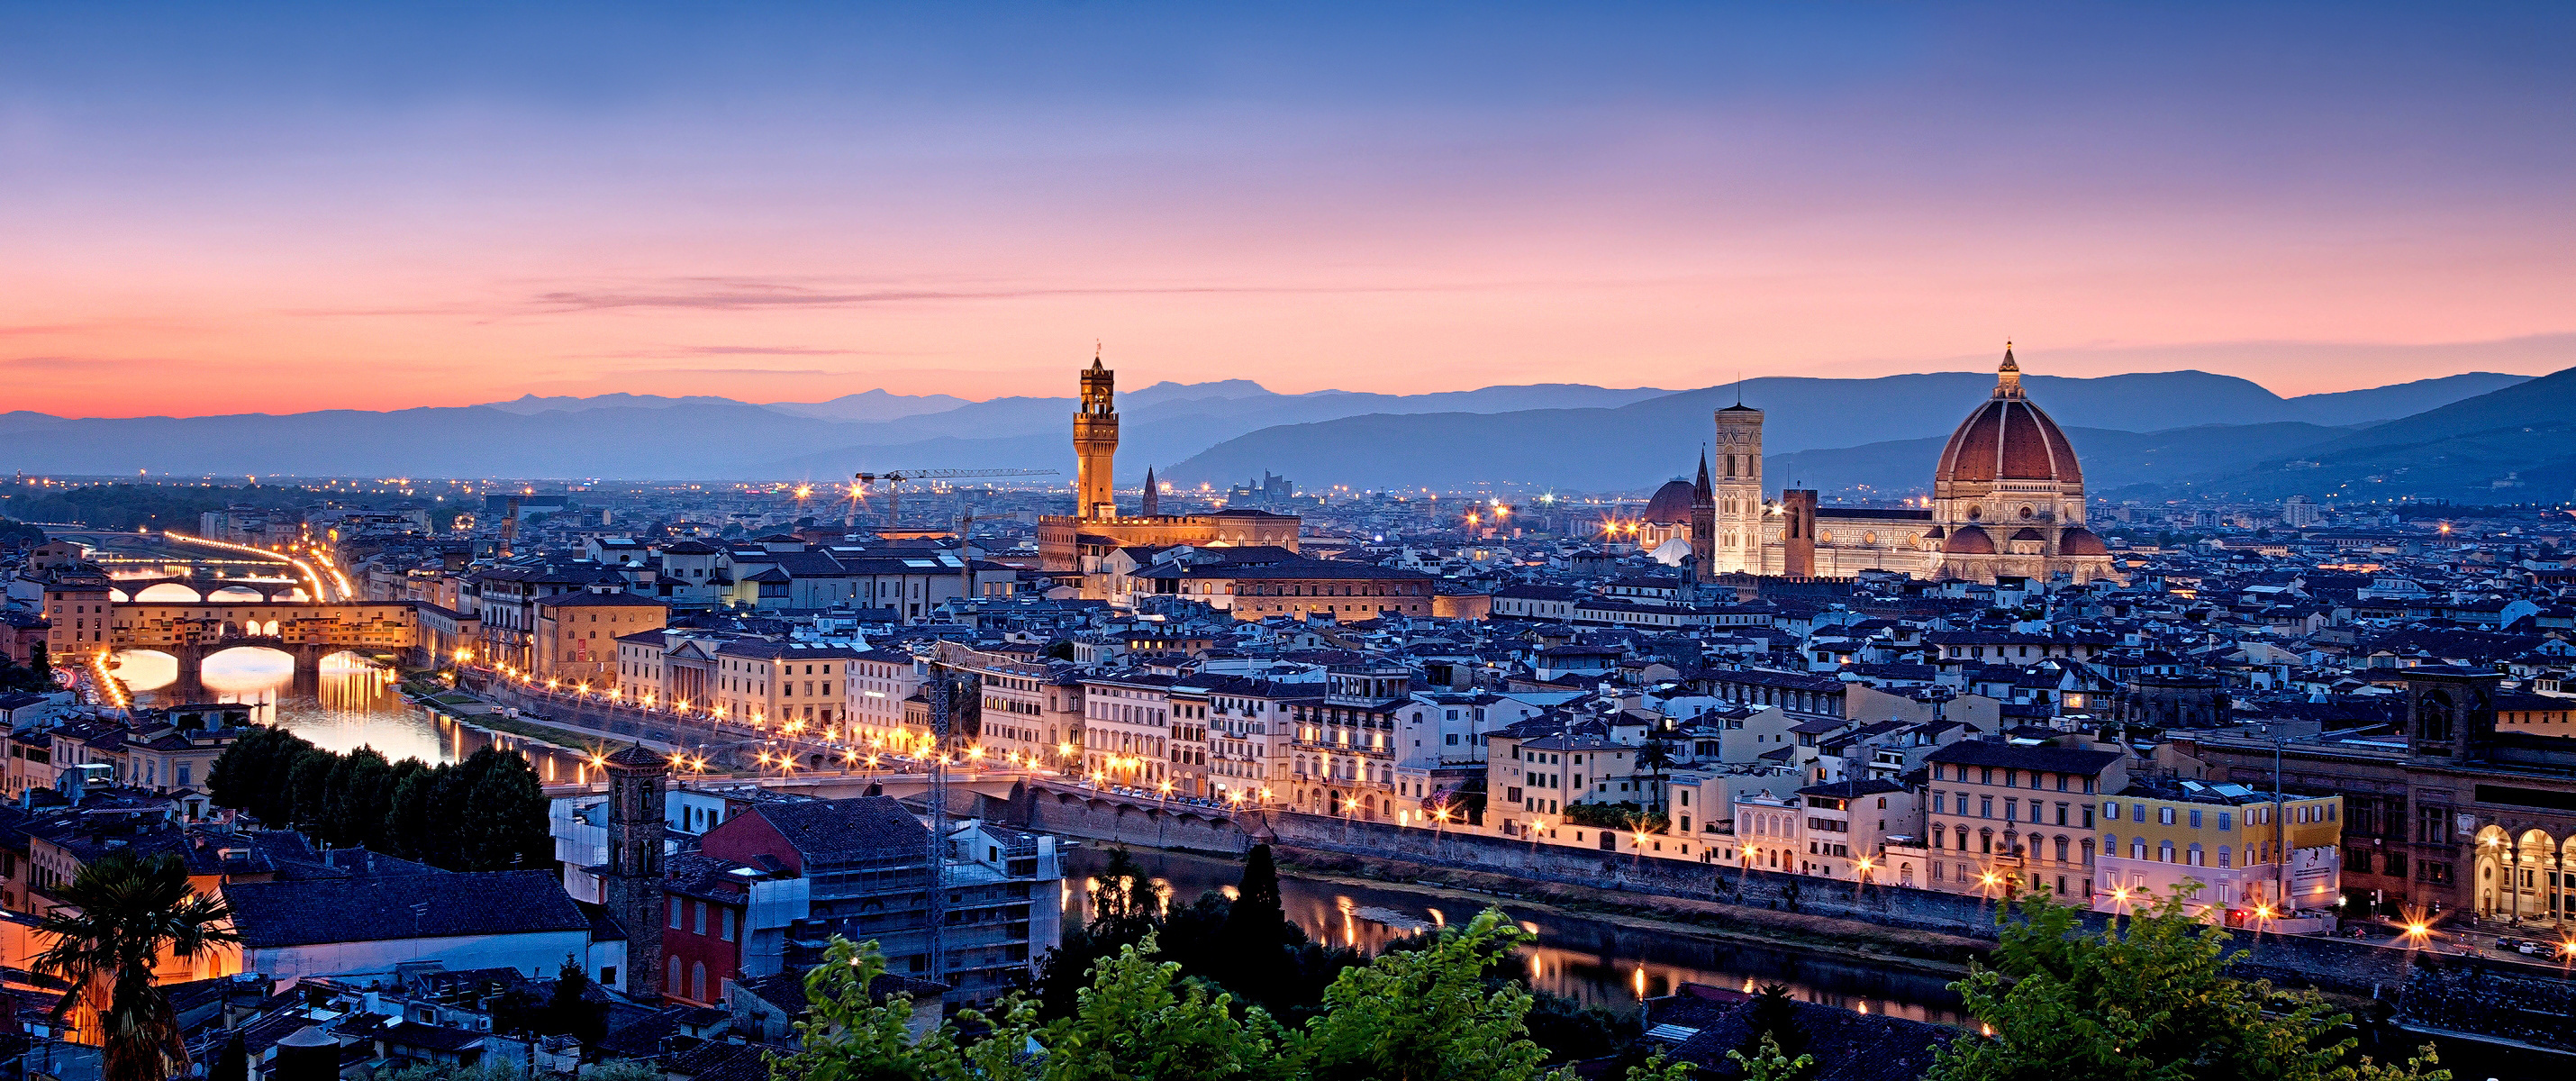 Toscana Tuscany Italy, Florence Firenze, Tuscan style, Captivating wallpaper, 2860x1200 Dual Screen Desktop